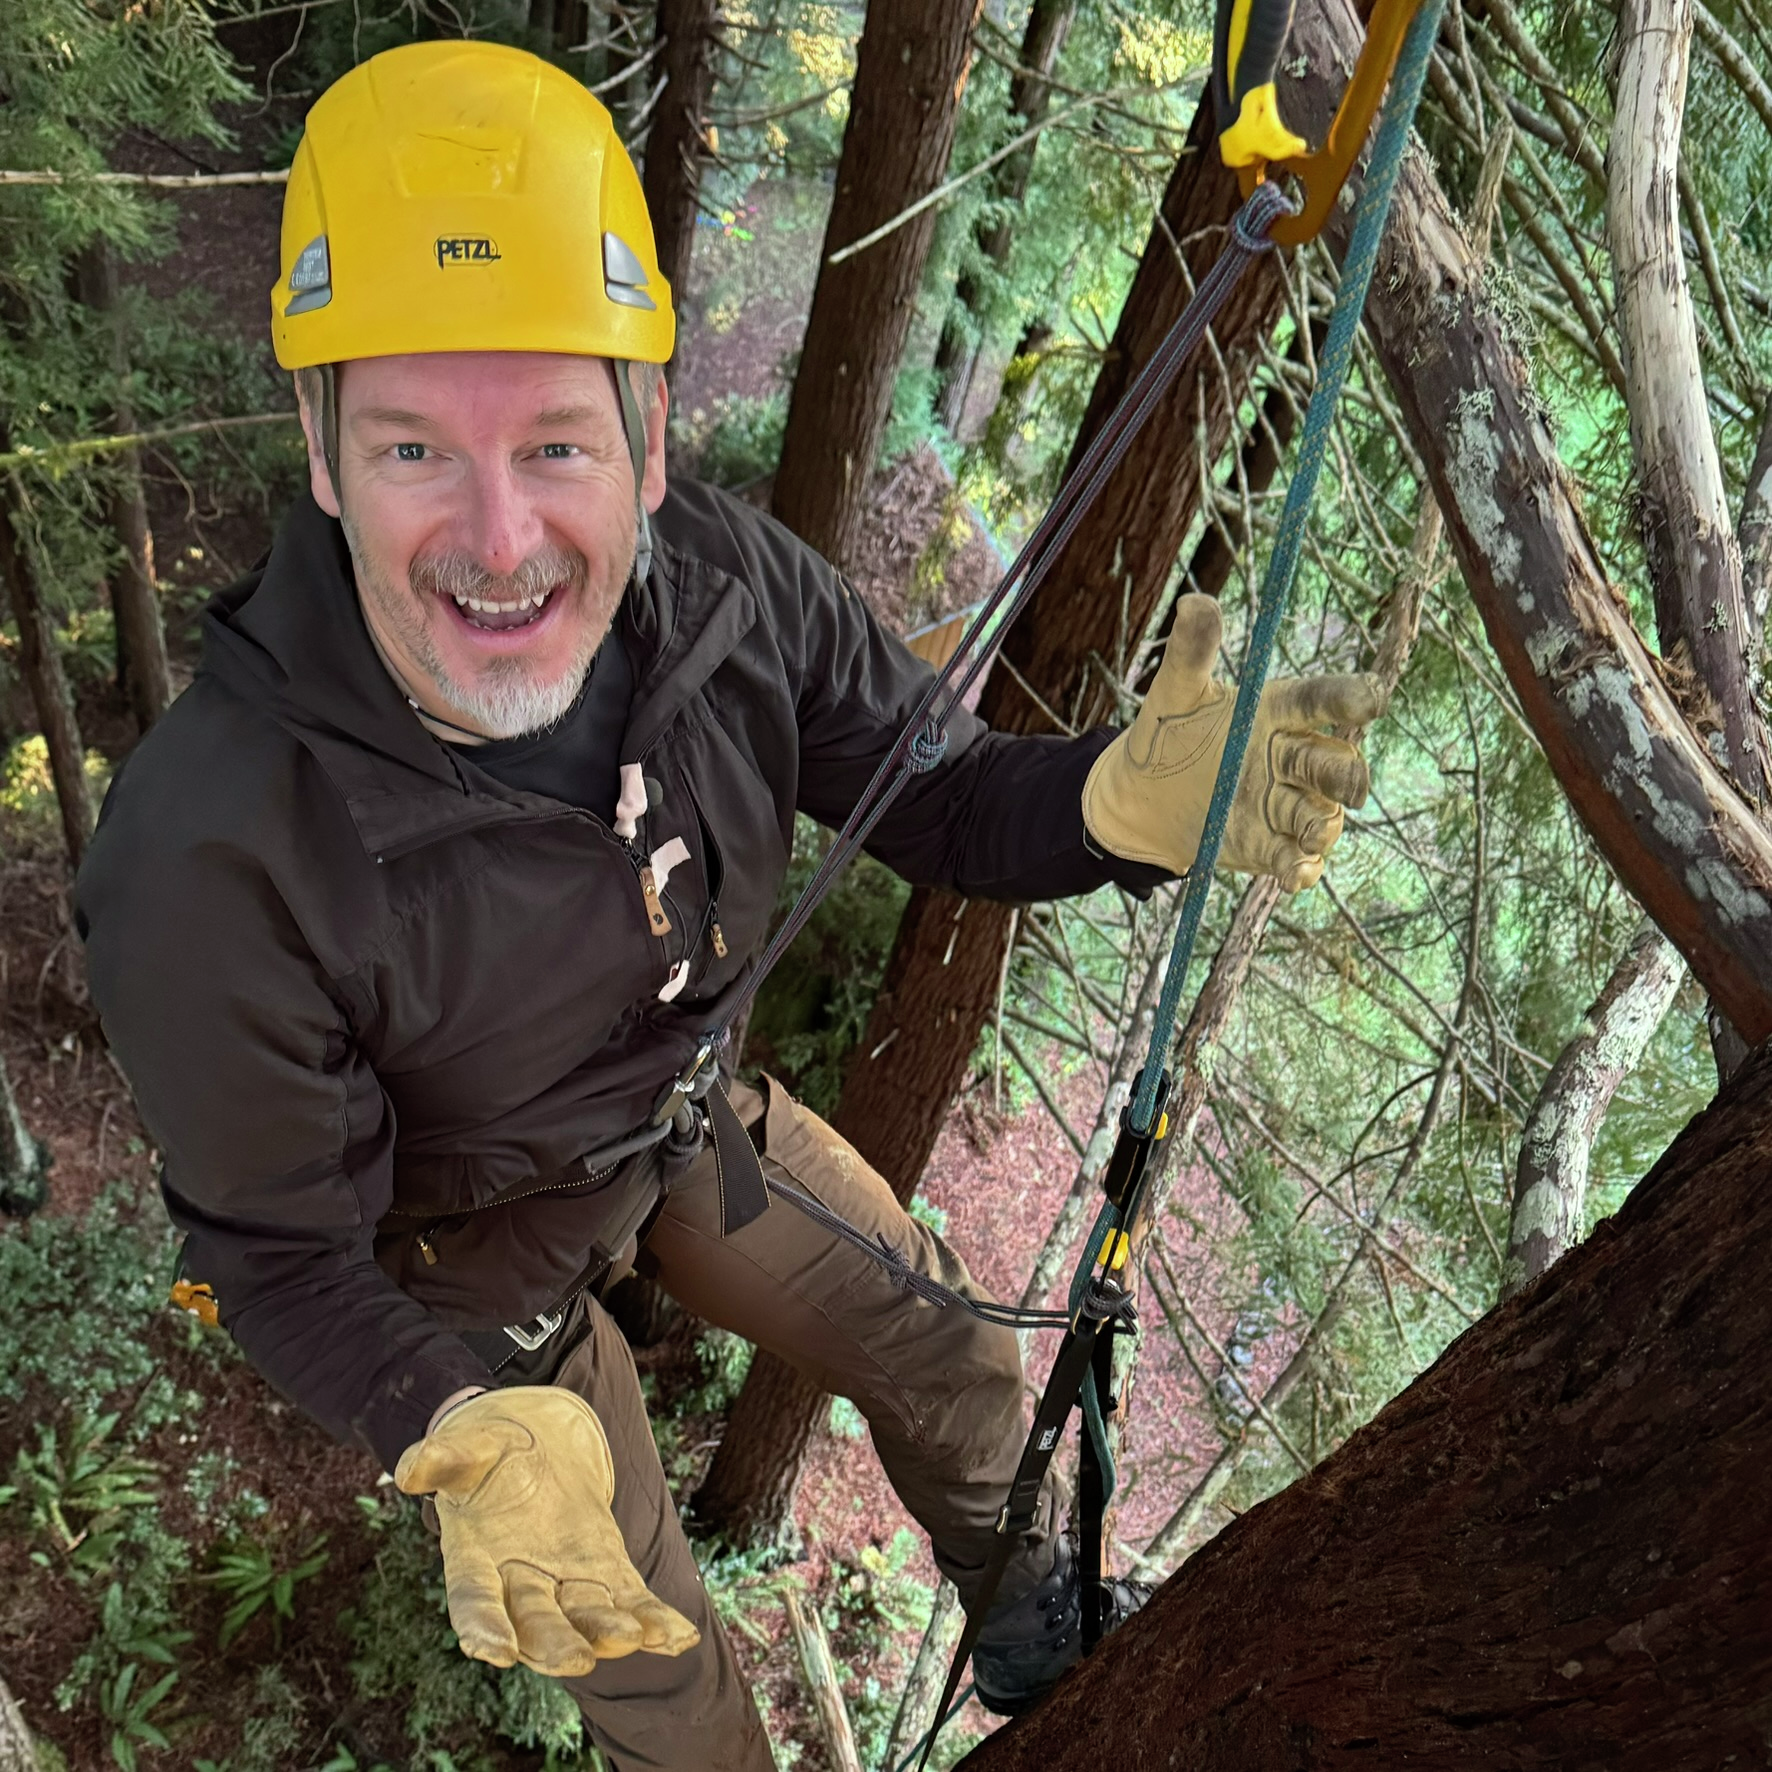 Redwood National Park: Saving the tallest trees on Earth